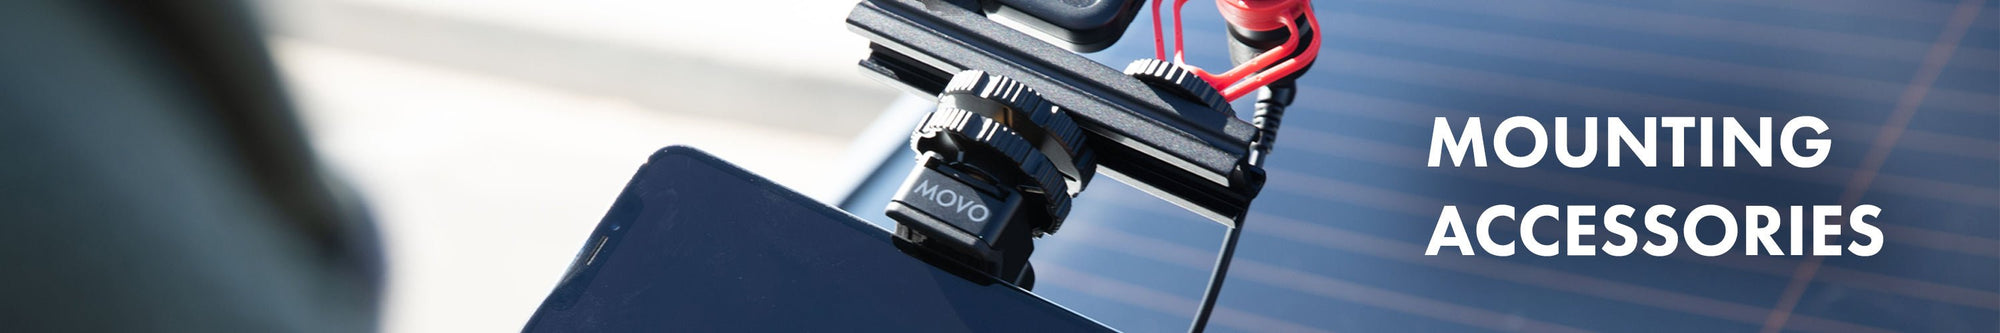 Mounting Accessories: Cold Shoe Mounts, Camera Shoe Brackets, and More - Movo